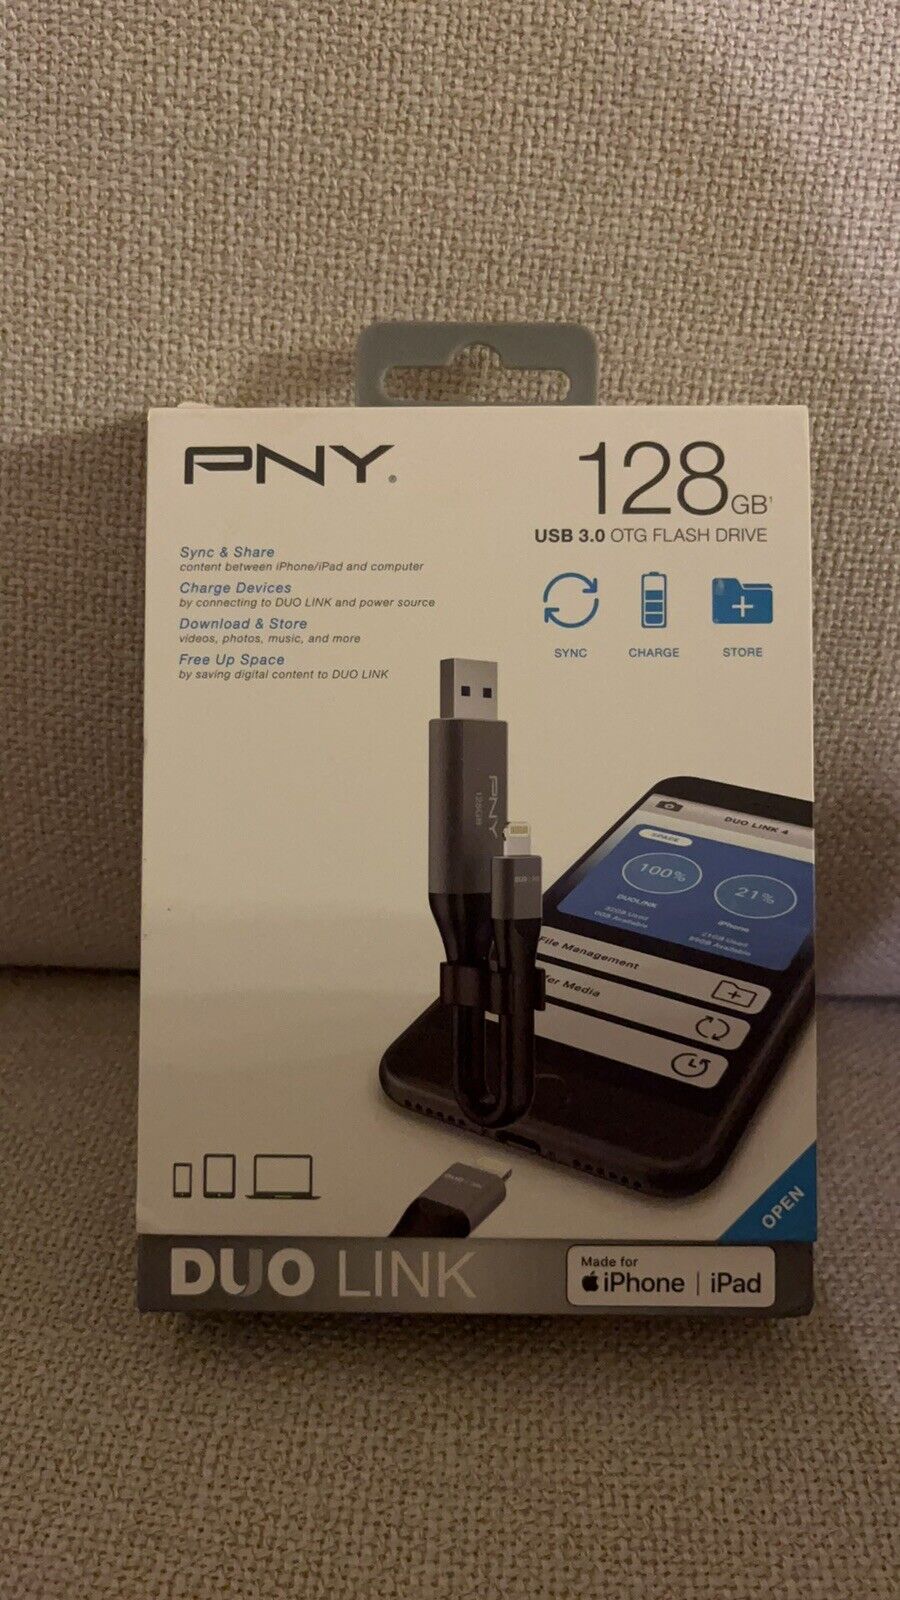 PNY 128GB DUO LINK iOS USB 3.0 OTG Flash Drive for iPhone & iPad and Computers